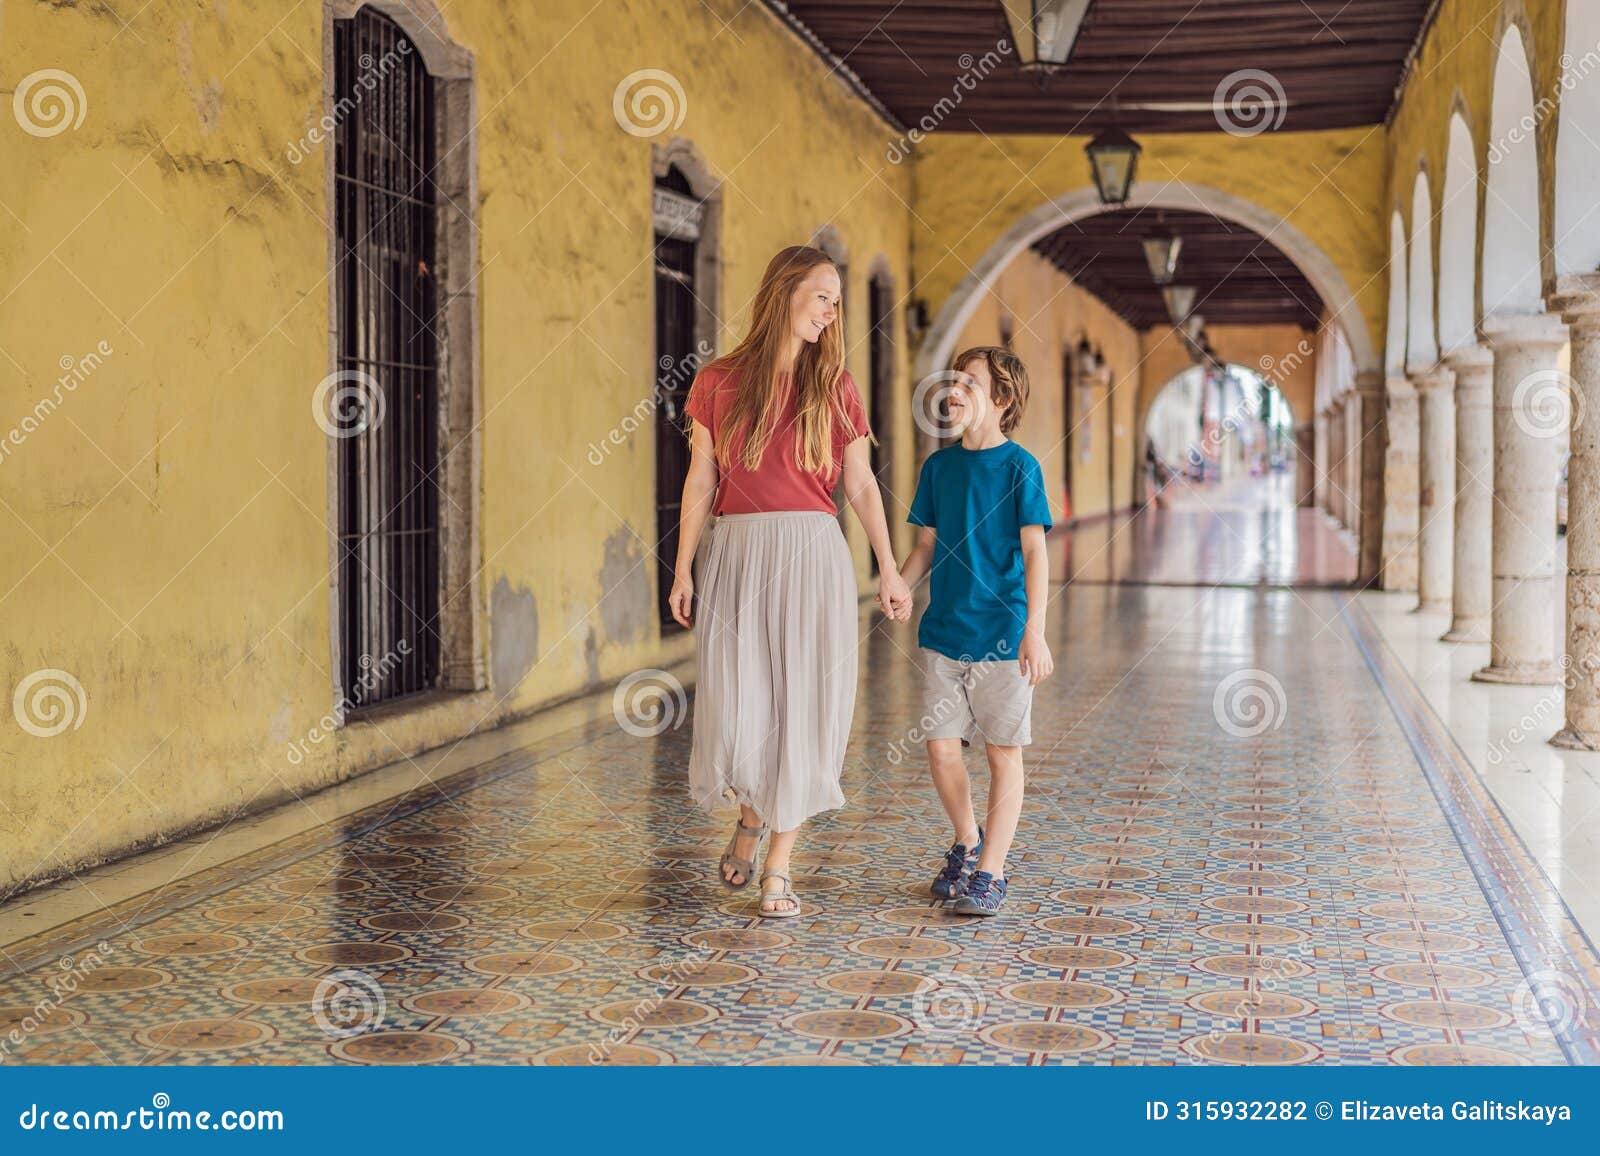 mother and son tourists explore the vibrant streets of valladolid, mexico, immersing herself in the rich culture and